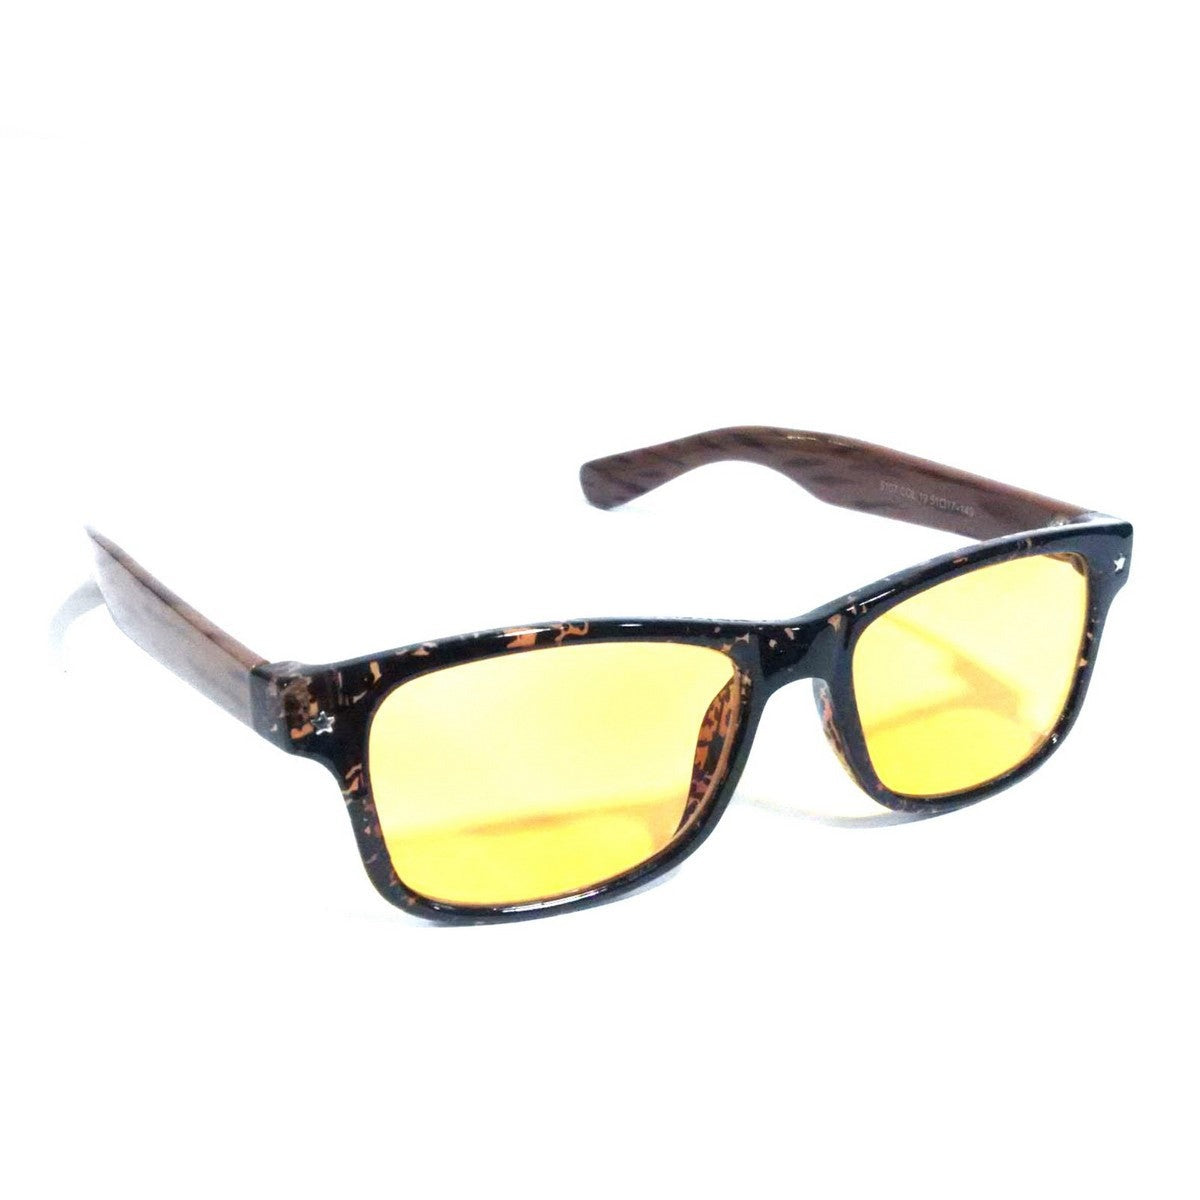 Stylish Night Driving Glasses for Men and Women with Anti Glare Coating | Glasses India